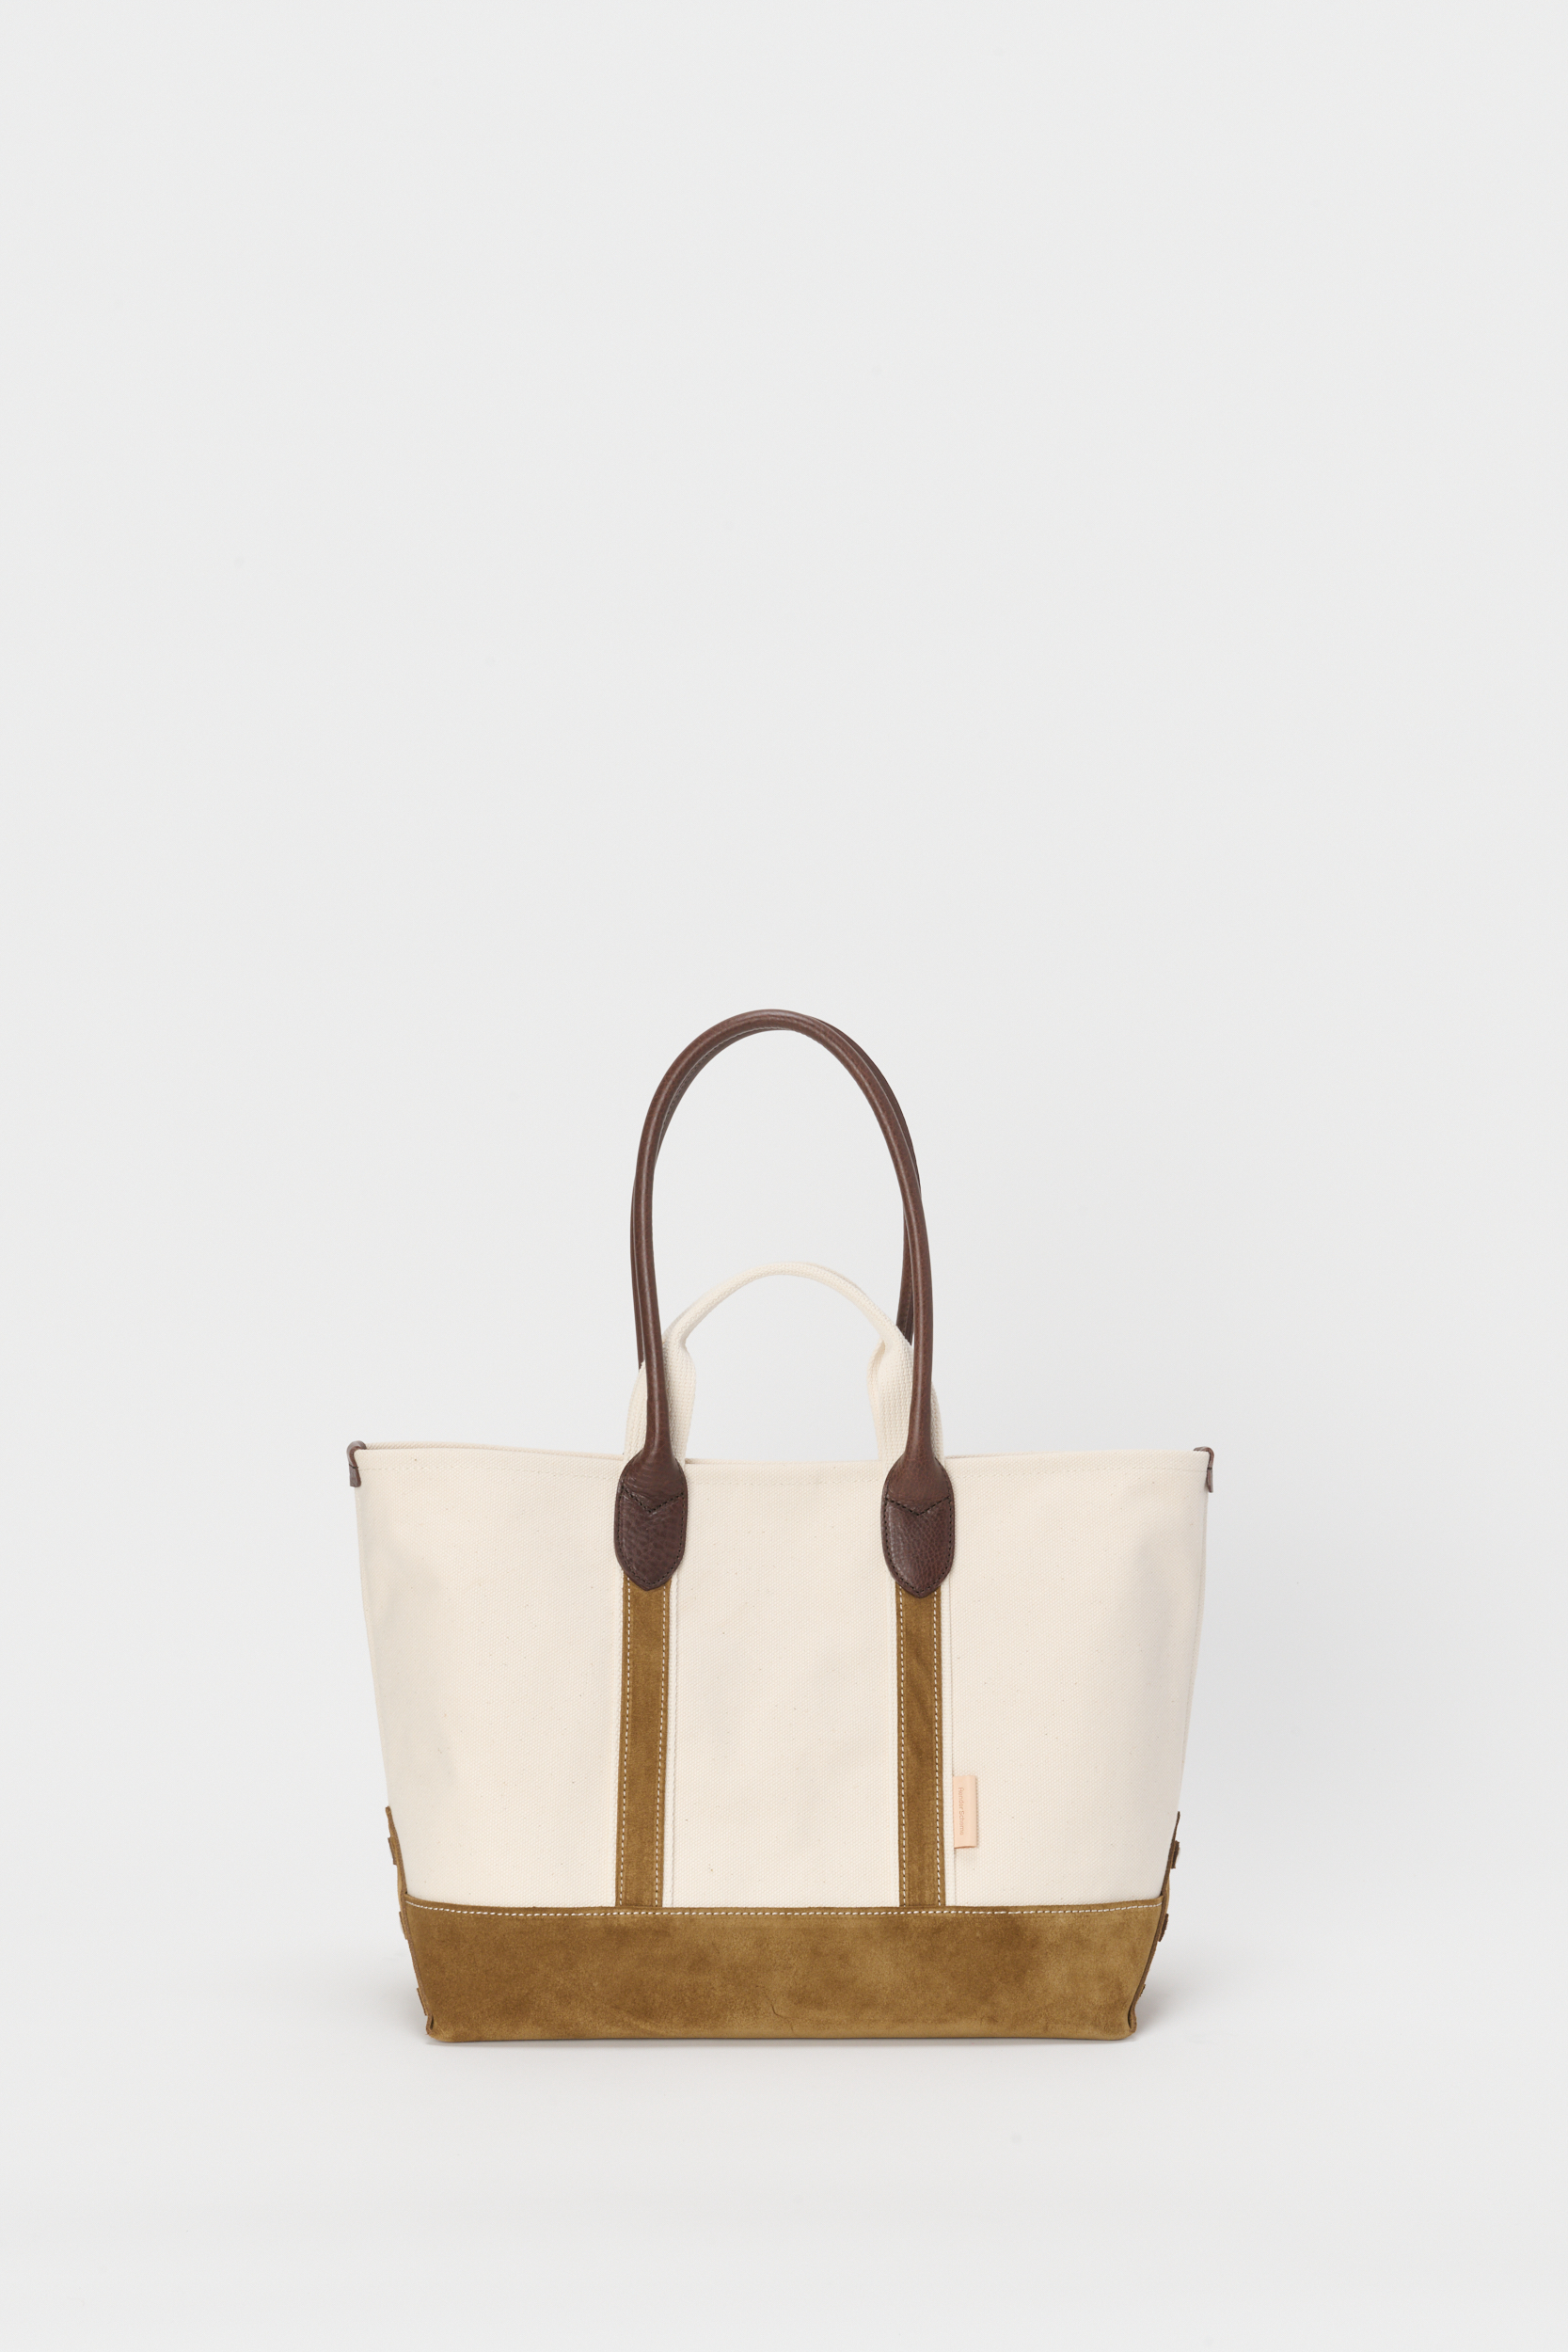 Hender Scheme campus suede handle tote M_camel エンダースキーマ トートバッグ 正規取扱店 公式通販 送料無料